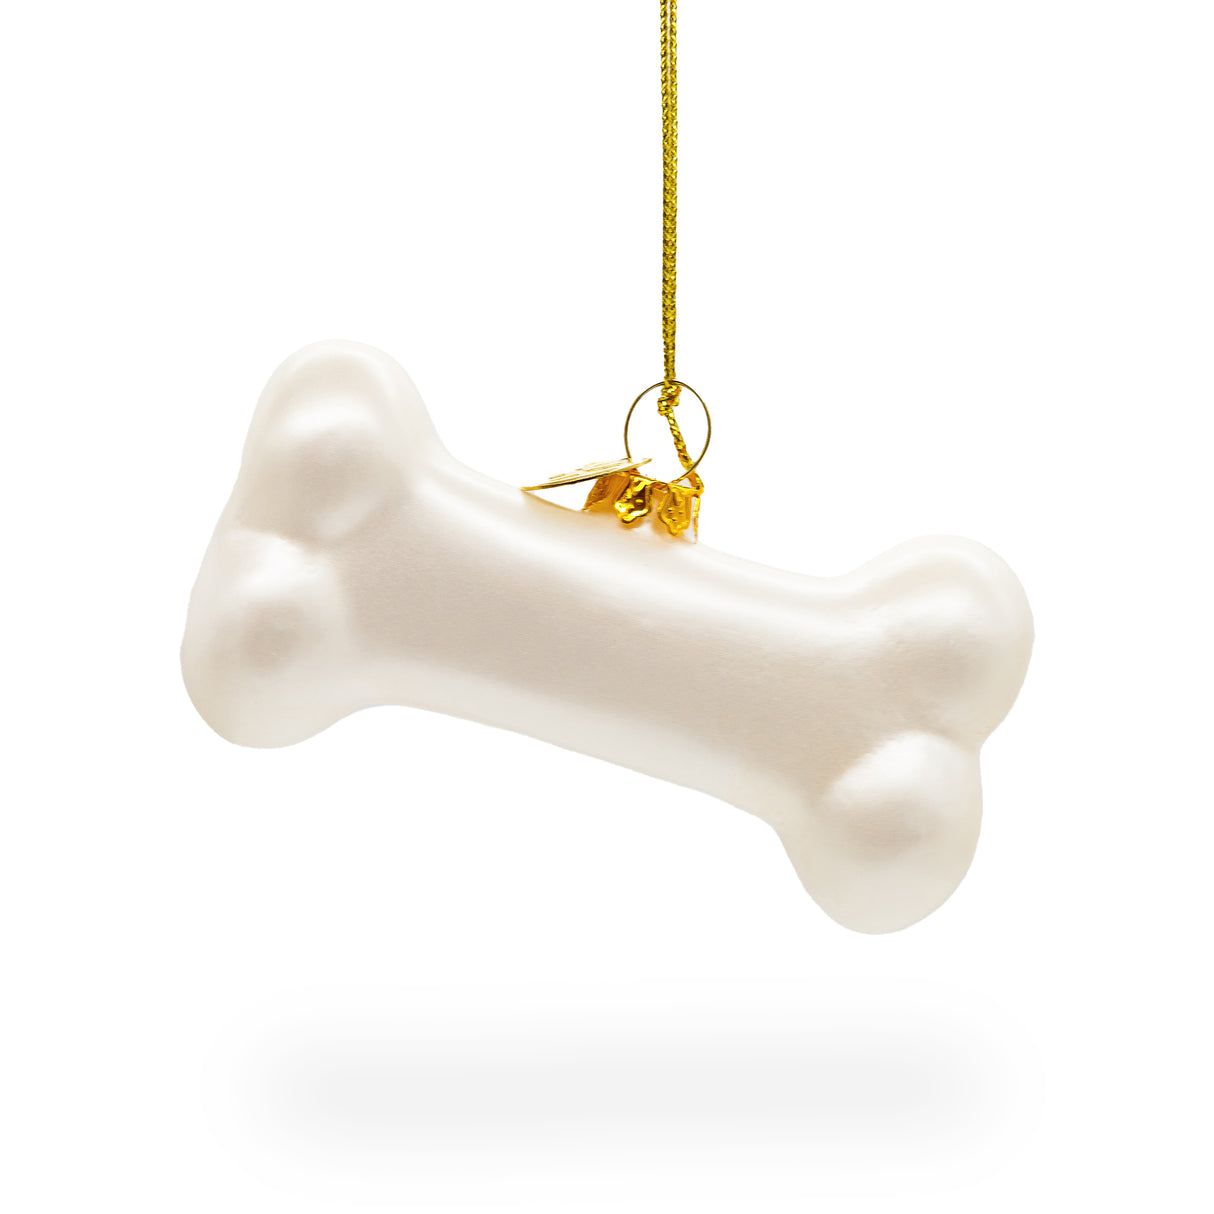 Glass Charming White Dog Bone - Blown Glass Christmas Ornament in White color